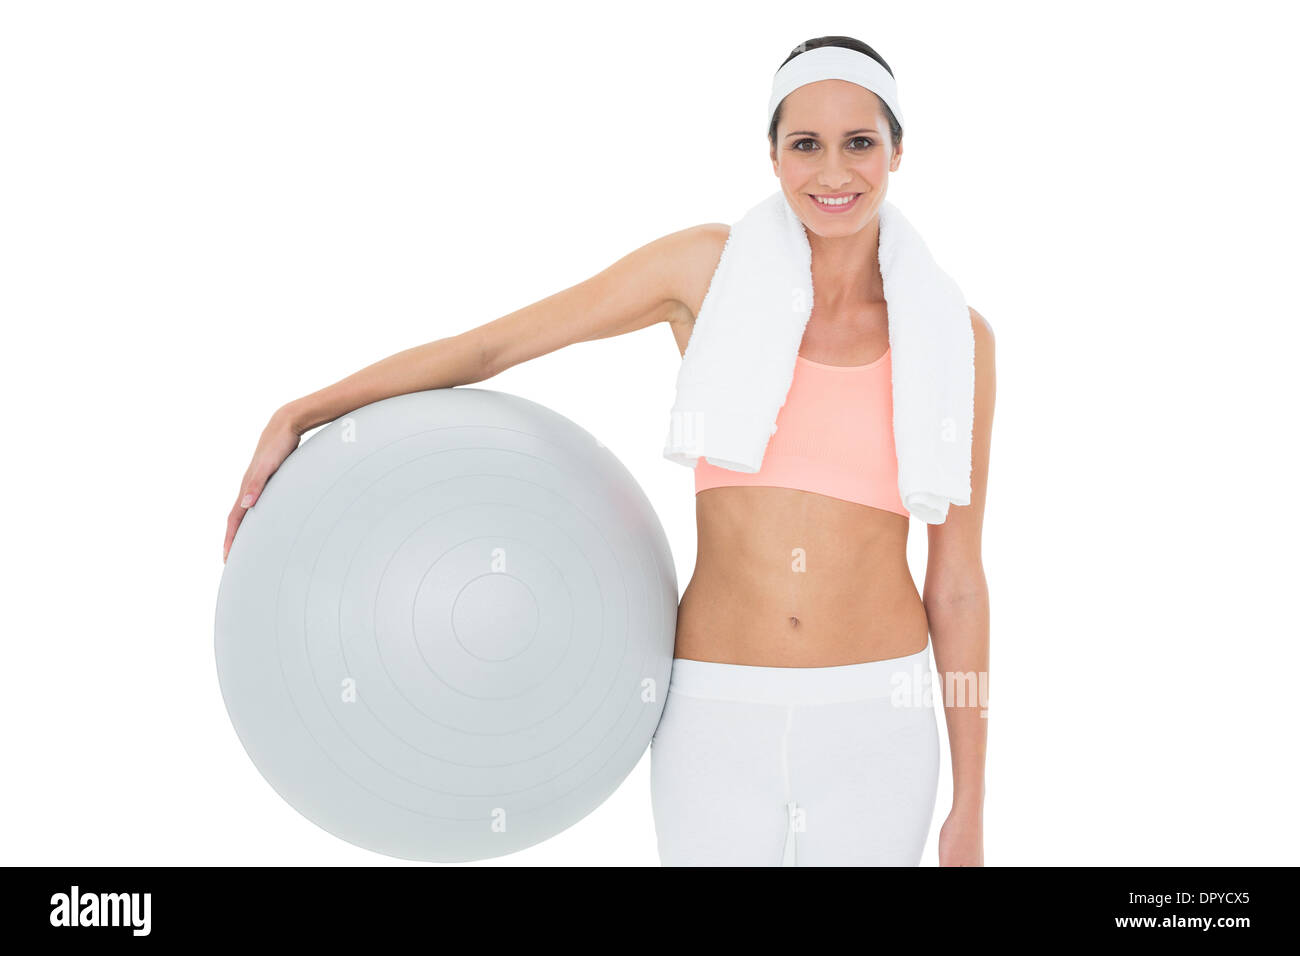 Portrait of a smiling fit woman holding fitness ball Stock Photo